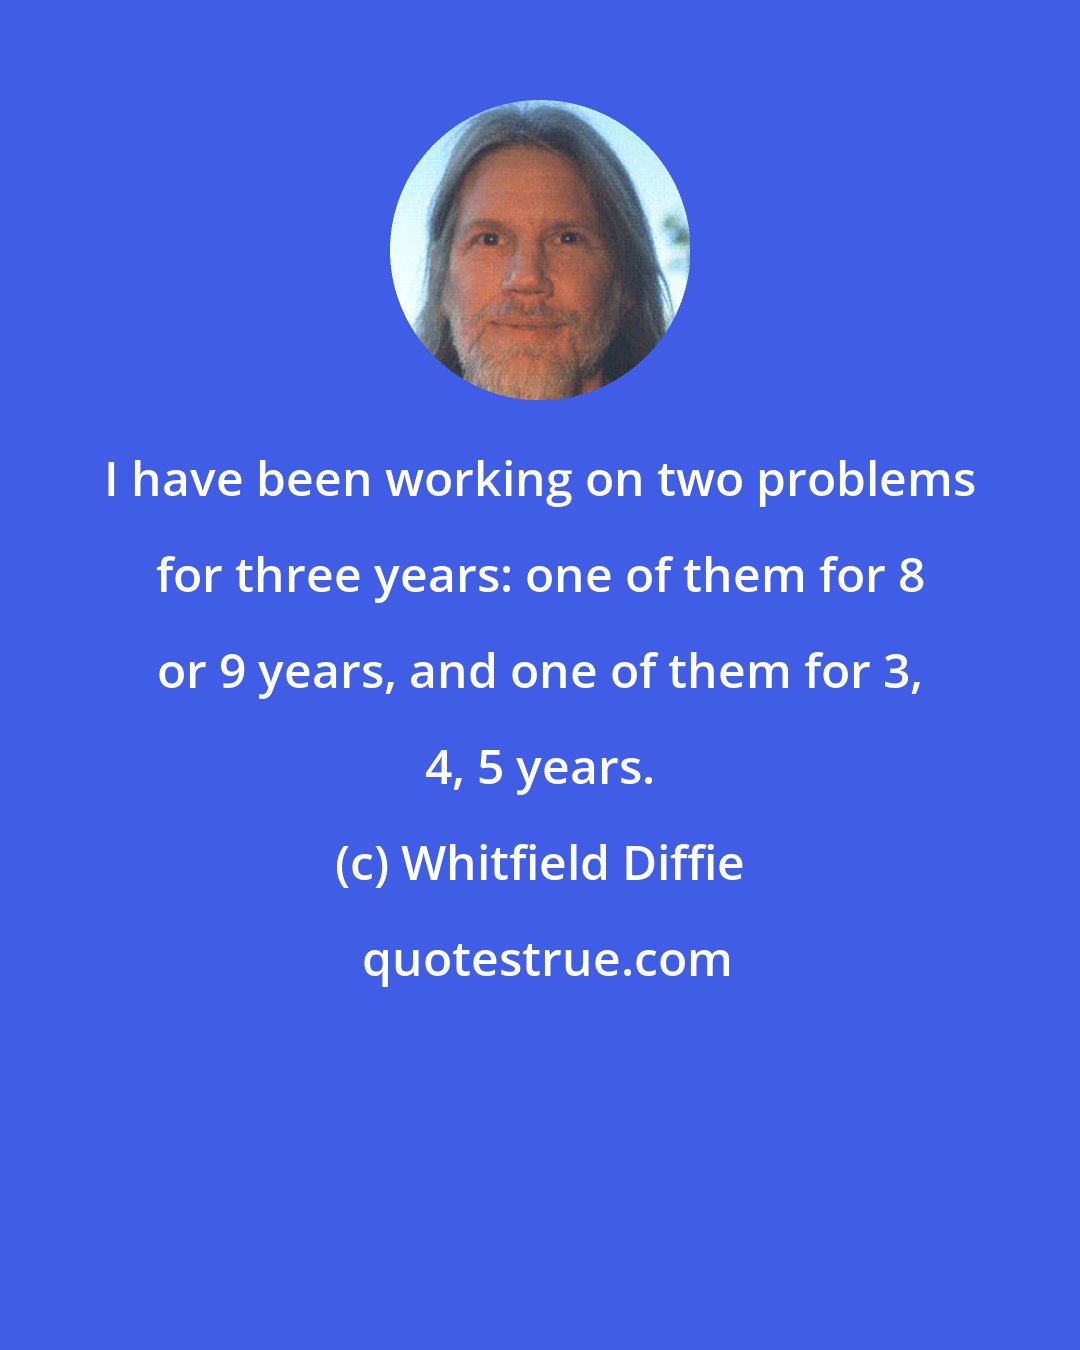 Whitfield Diffie: I have been working on two problems for three years: one of them for 8 or 9 years, and one of them for 3, 4, 5 years.